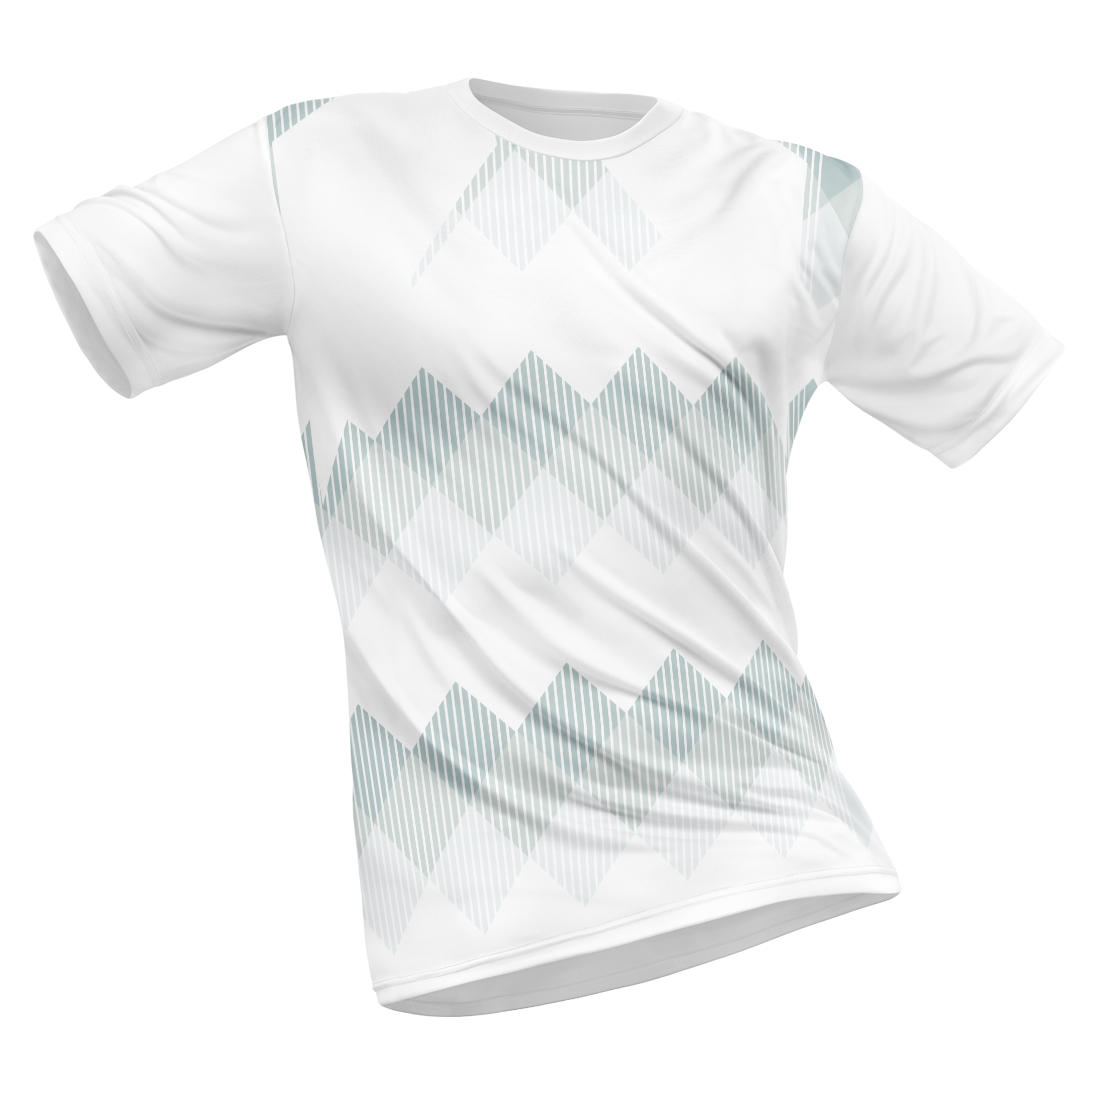 Polyester Half Sleeve Jersey with Round Collar and All Over Digital Print.